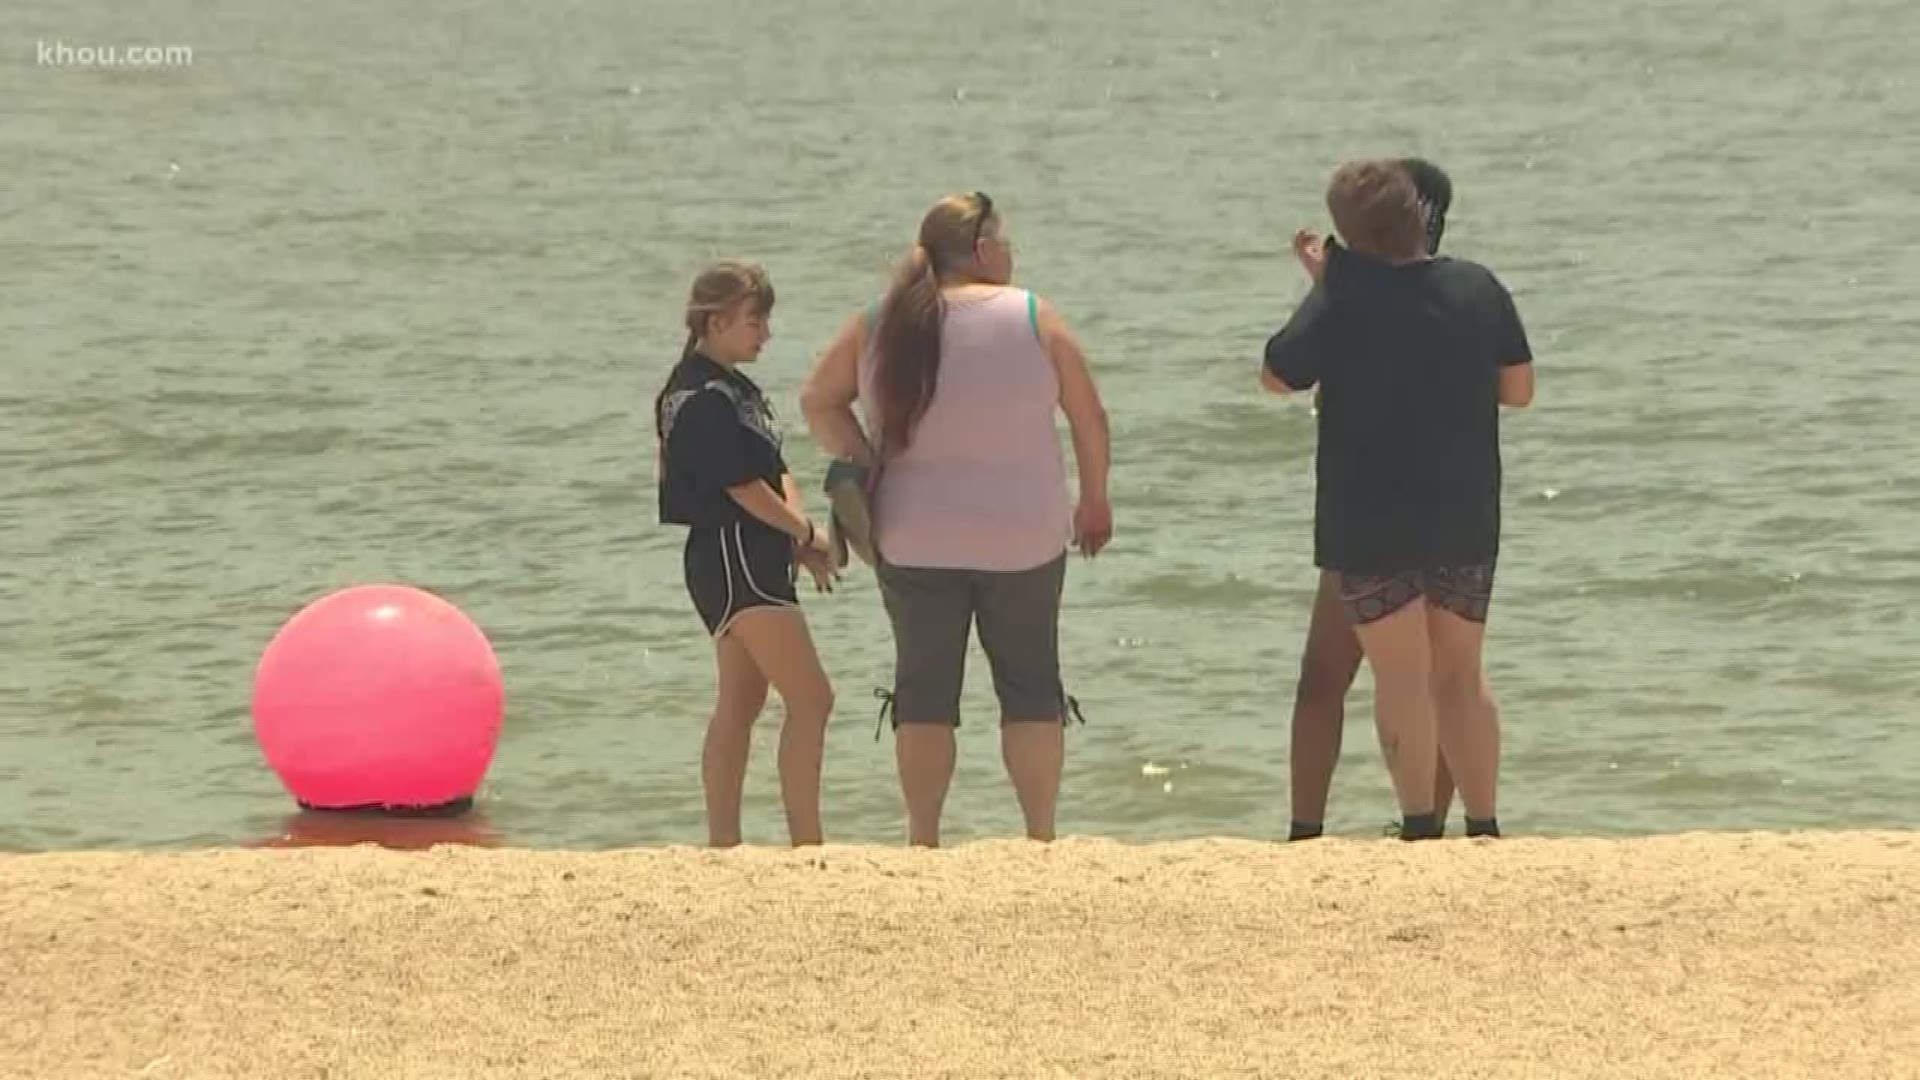 Children, ages 7, 11, and 13, drowned Thursday evening during a family outing at Sylvan Beach.